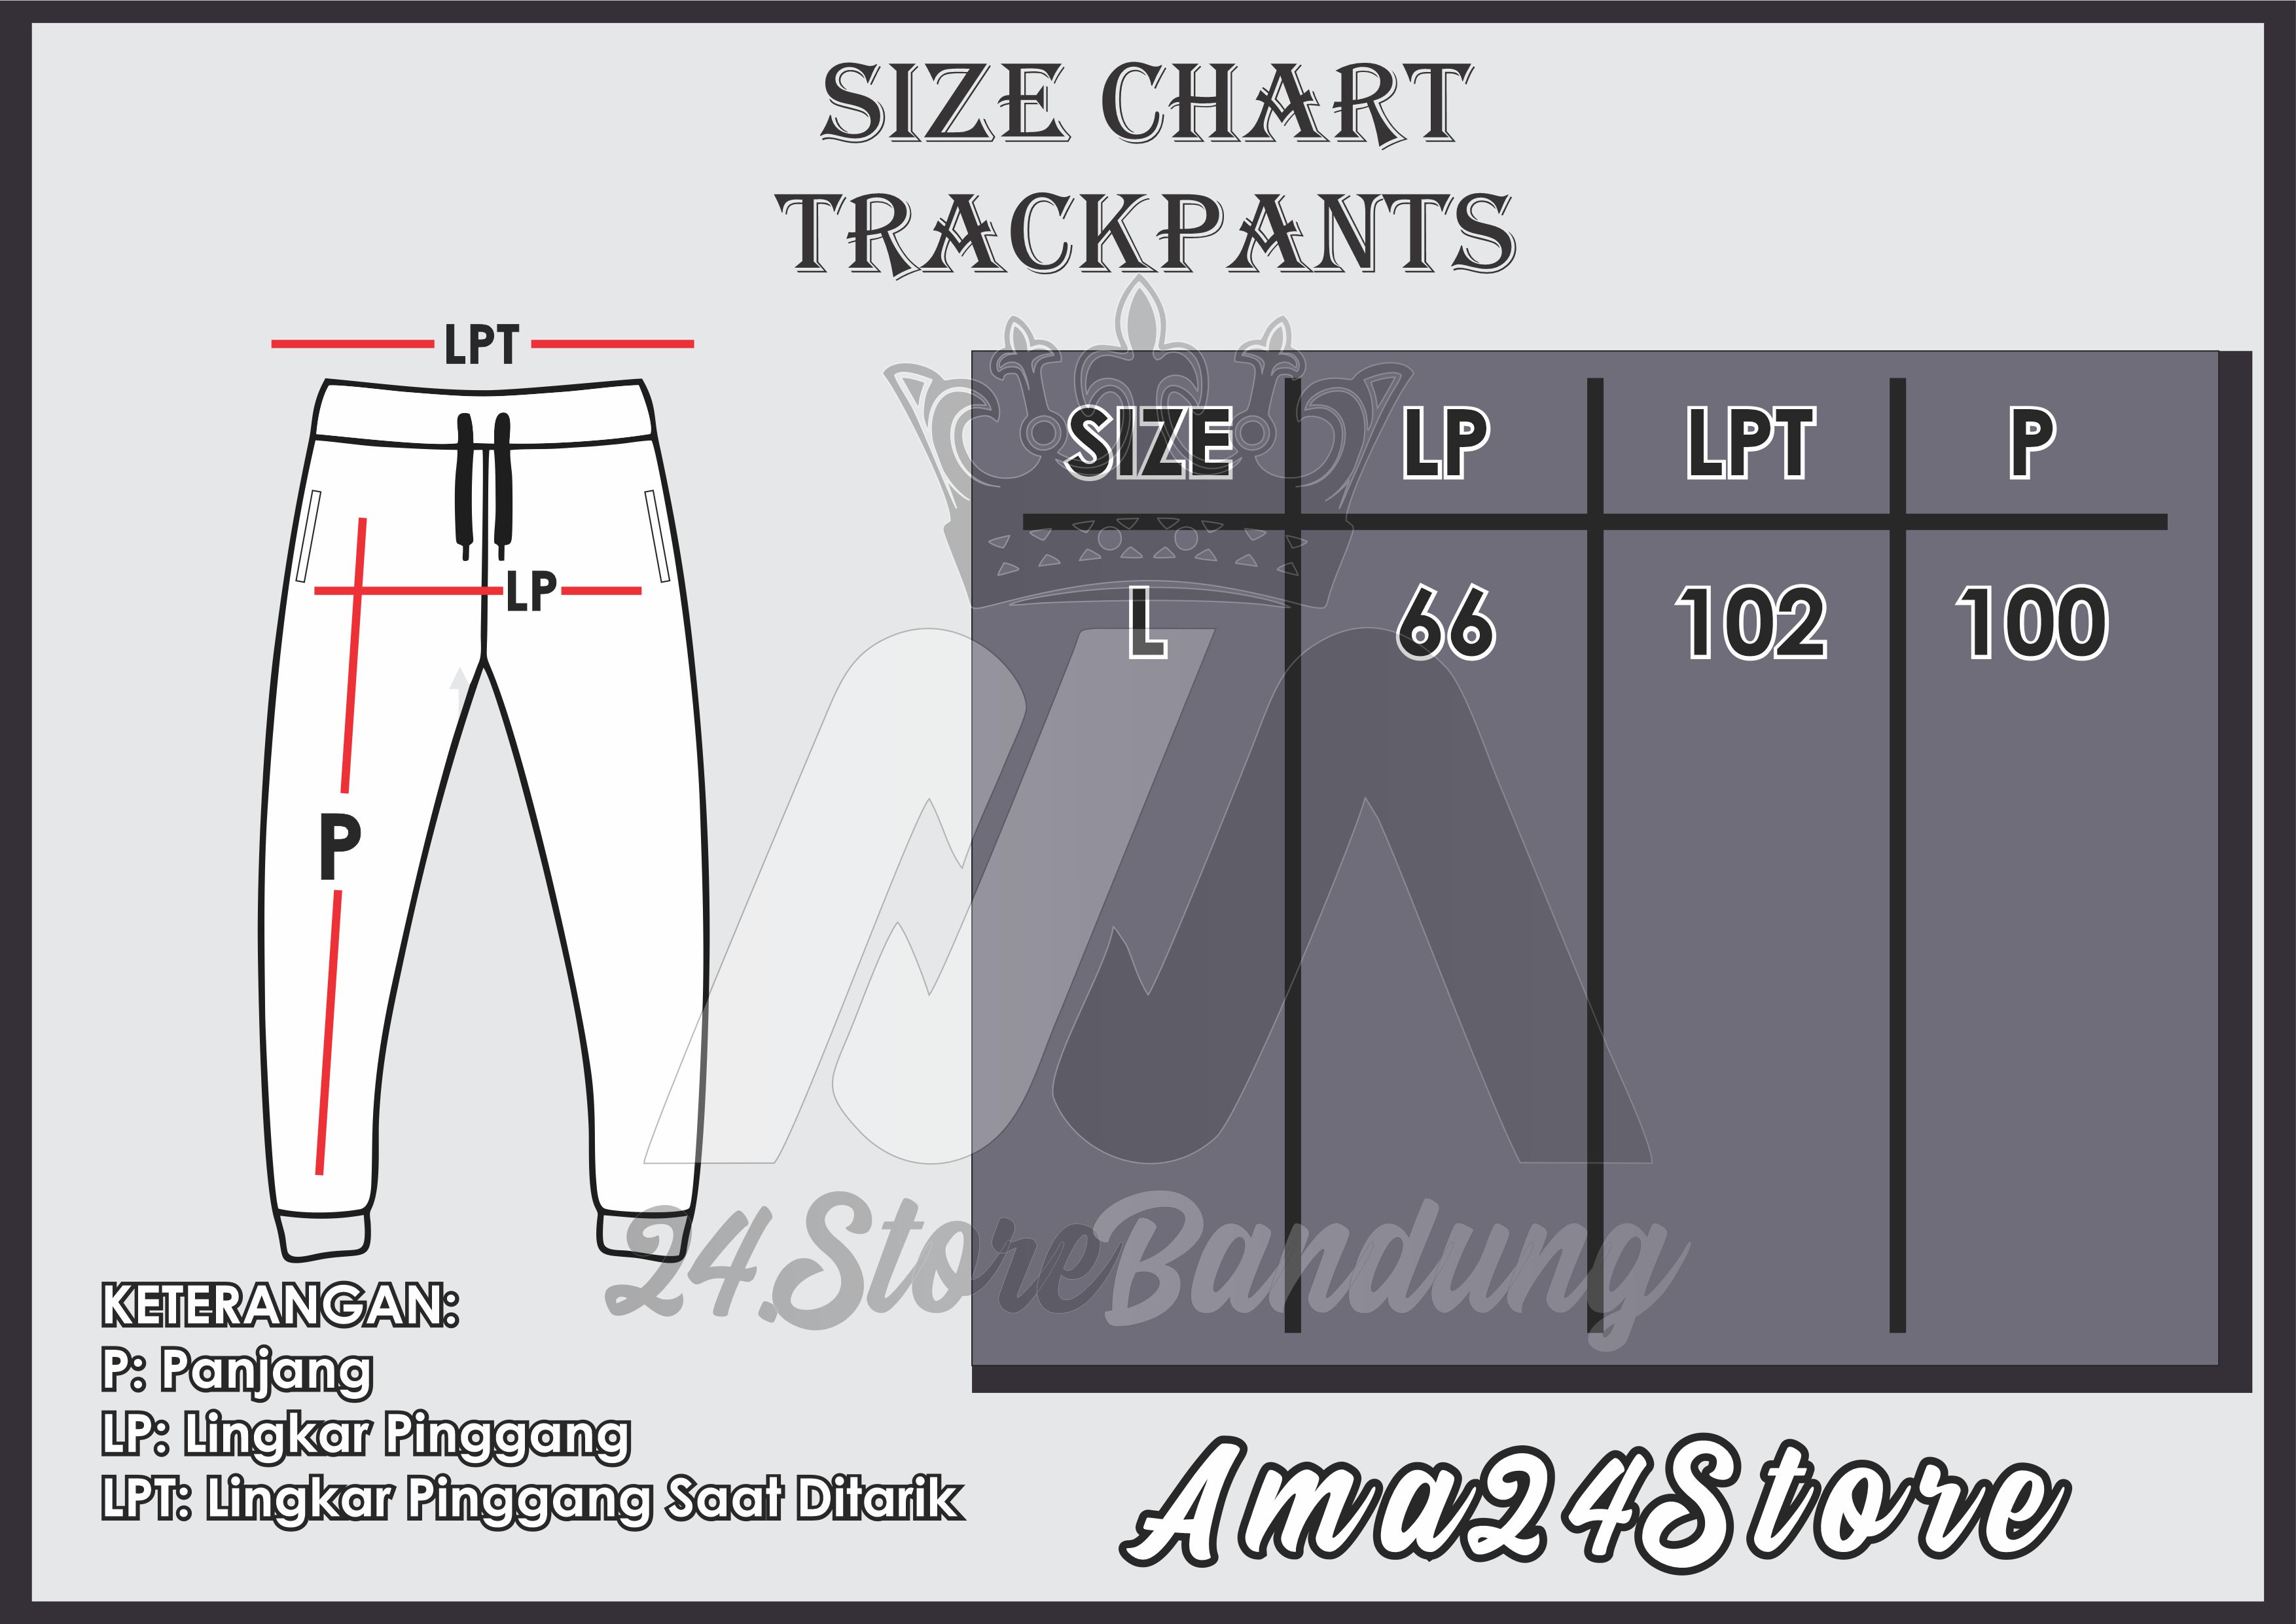 Sweatpants Size Chart For Women And Men ThreadCurve, 51% OFF